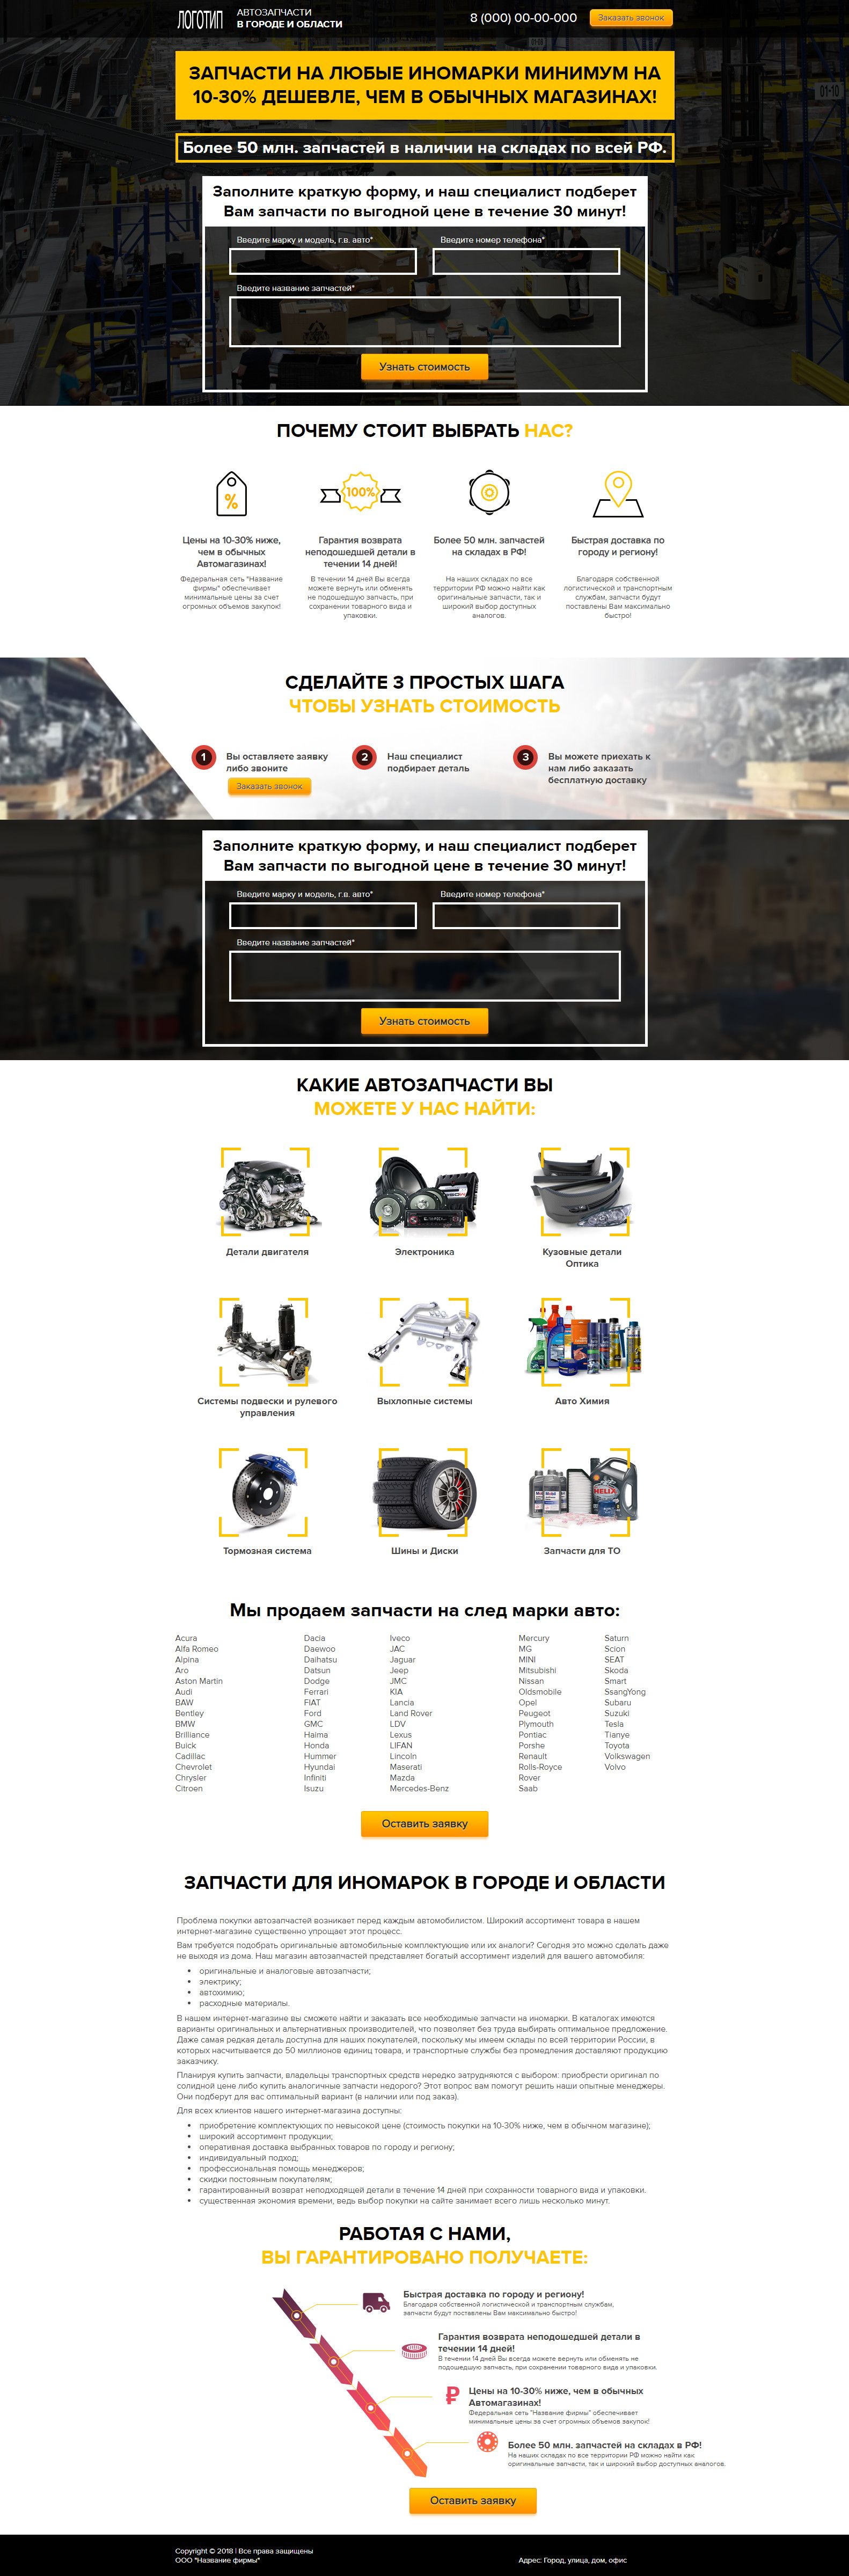 Landing page - spare parts for any foreign cars